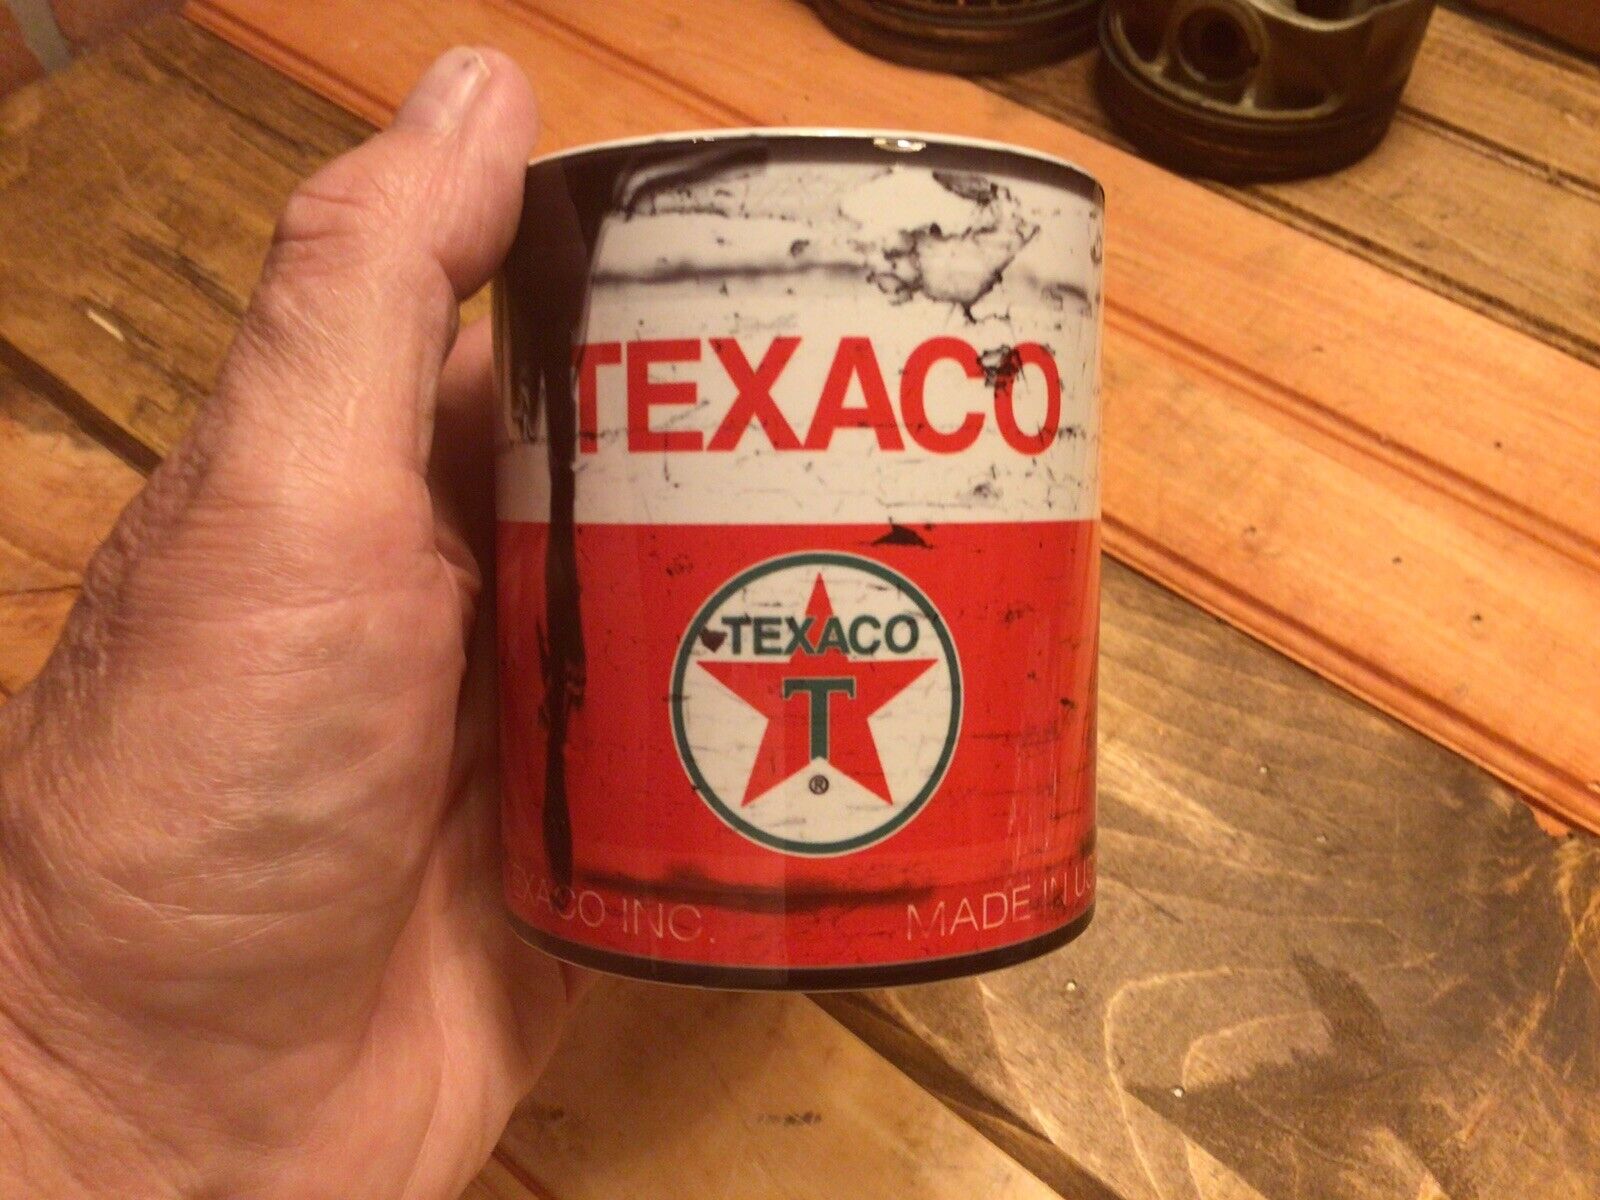 New 11 oz Texaco Star Gasoline Coffee Mug Great for Collectors Make a Great Gift